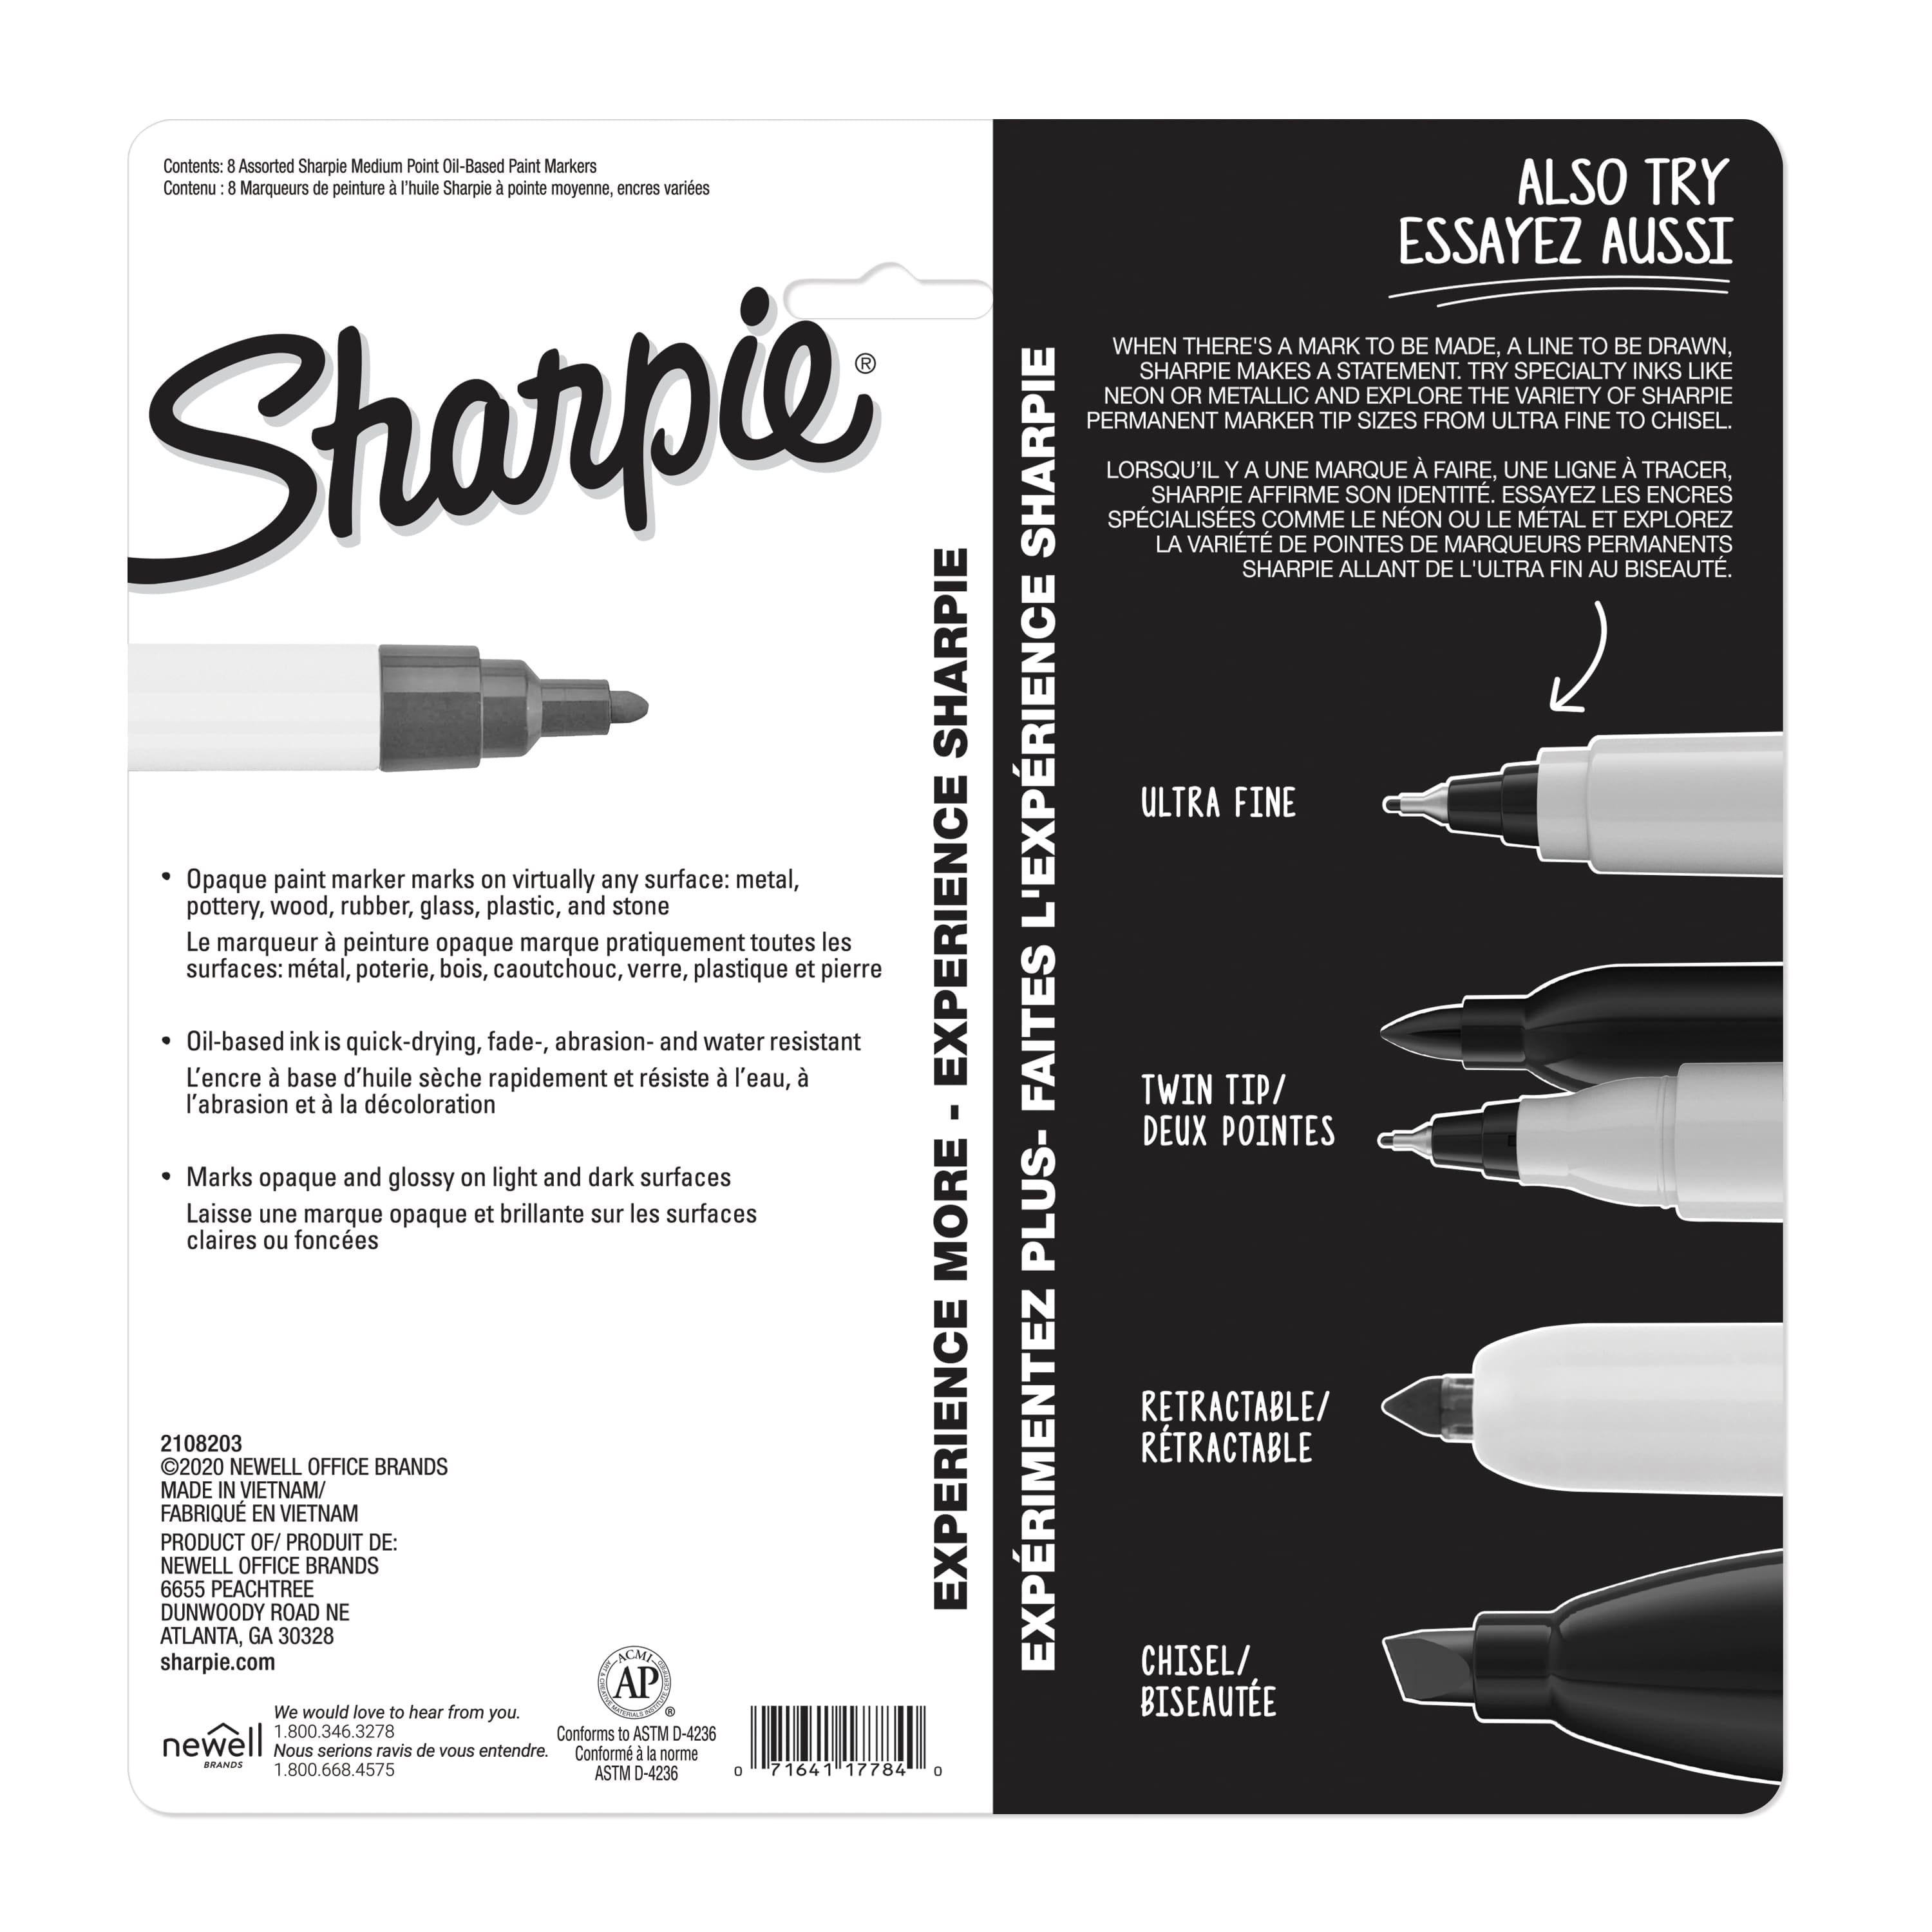 Sharpie Oil-Based Paint Markers, Medium Point, Assorted Colors, 8 Count 